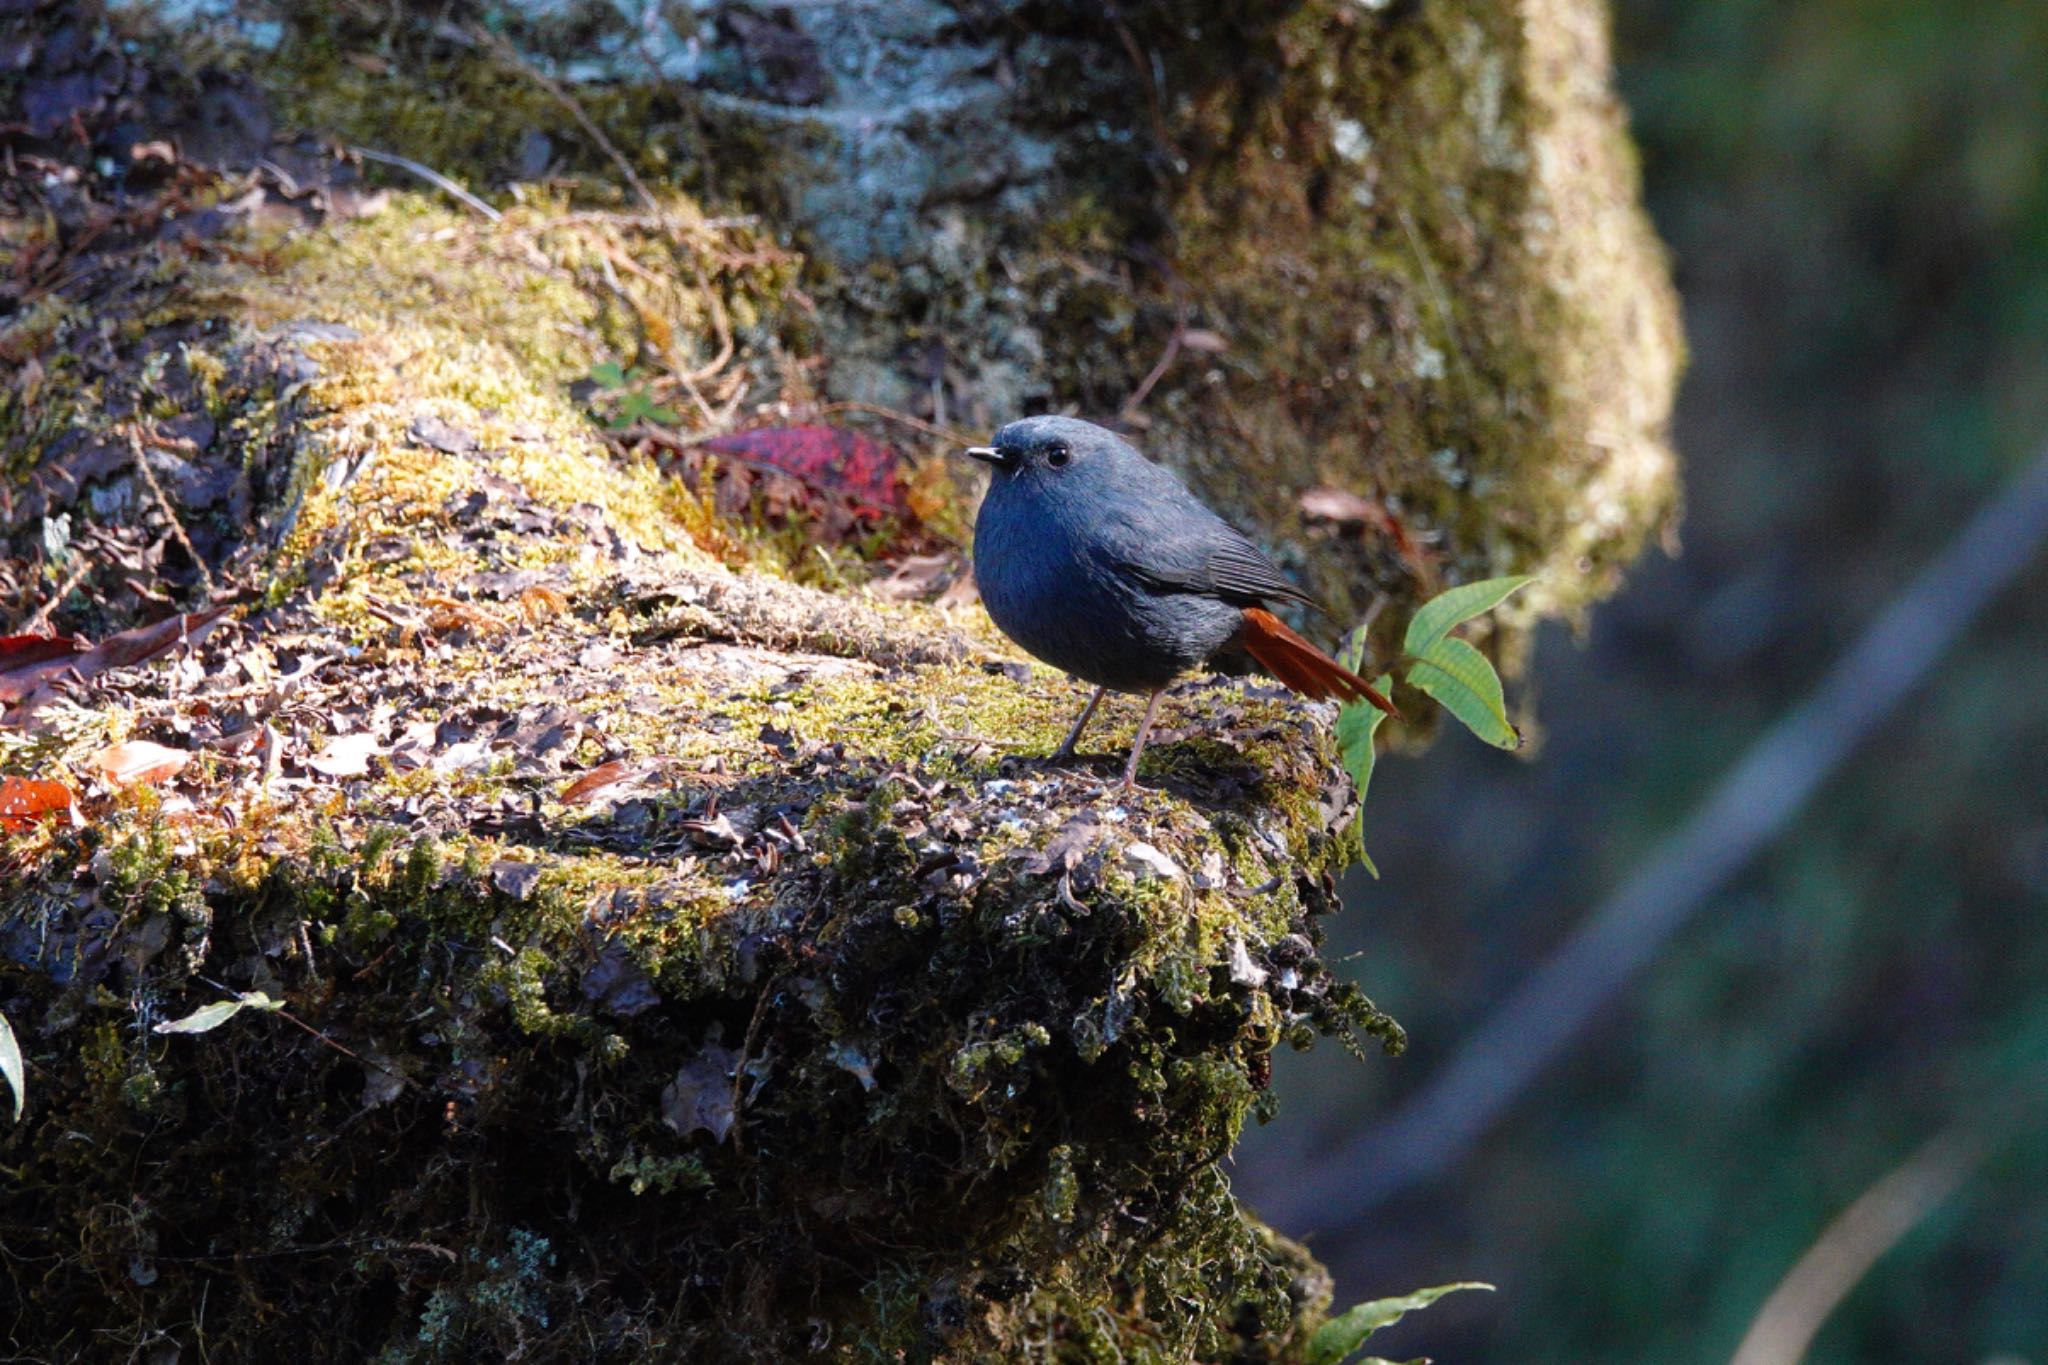 Photo of Plumbeous Water Redstart at 阿里山国家森林遊楽区 by のどか